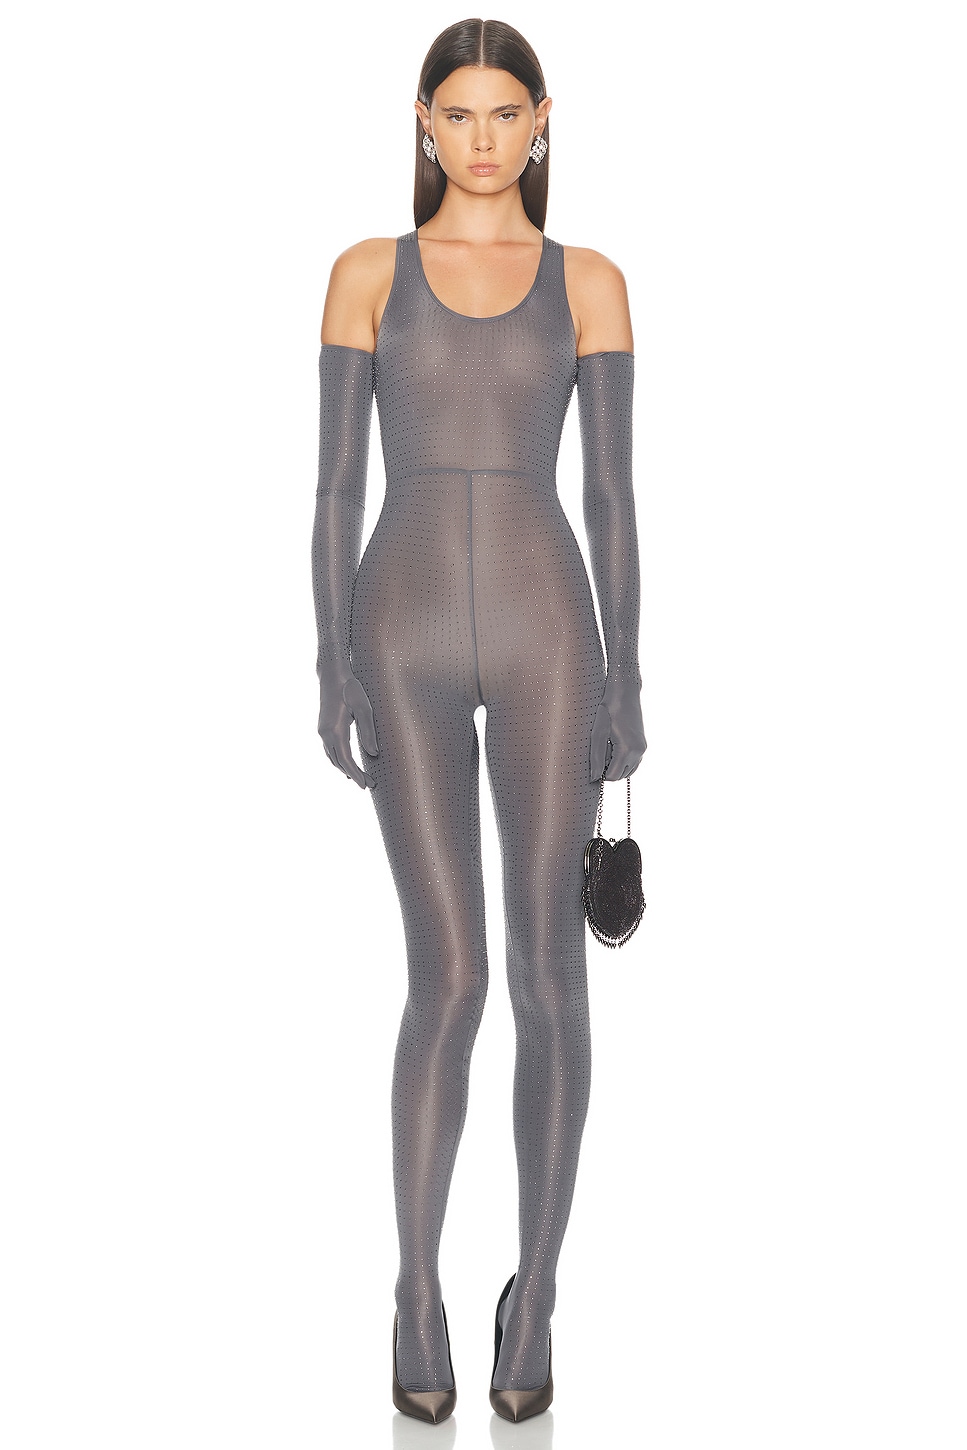 Image 1 of Alex Perry Singlet Crystal Glove Catsuit in Iron